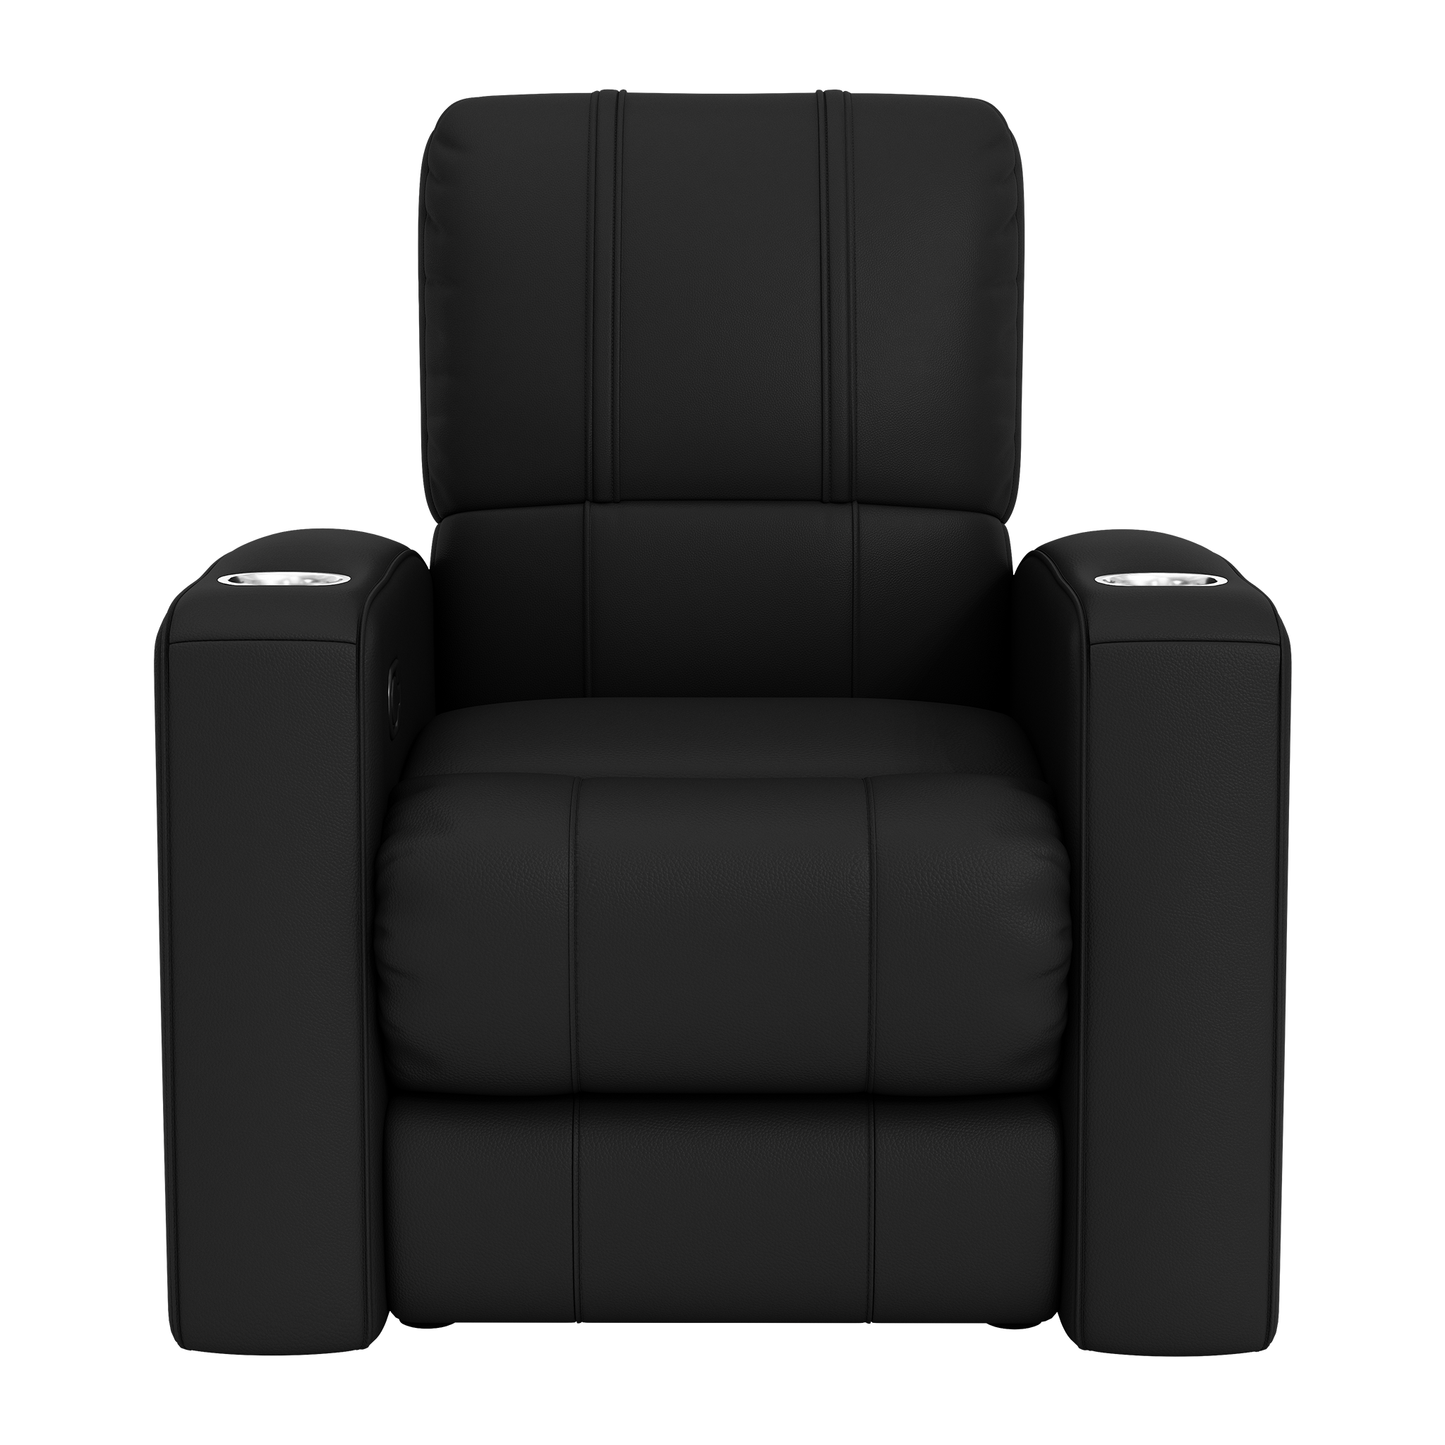 Relax Home Theater Recliner with Nashville SC Alternate Logo